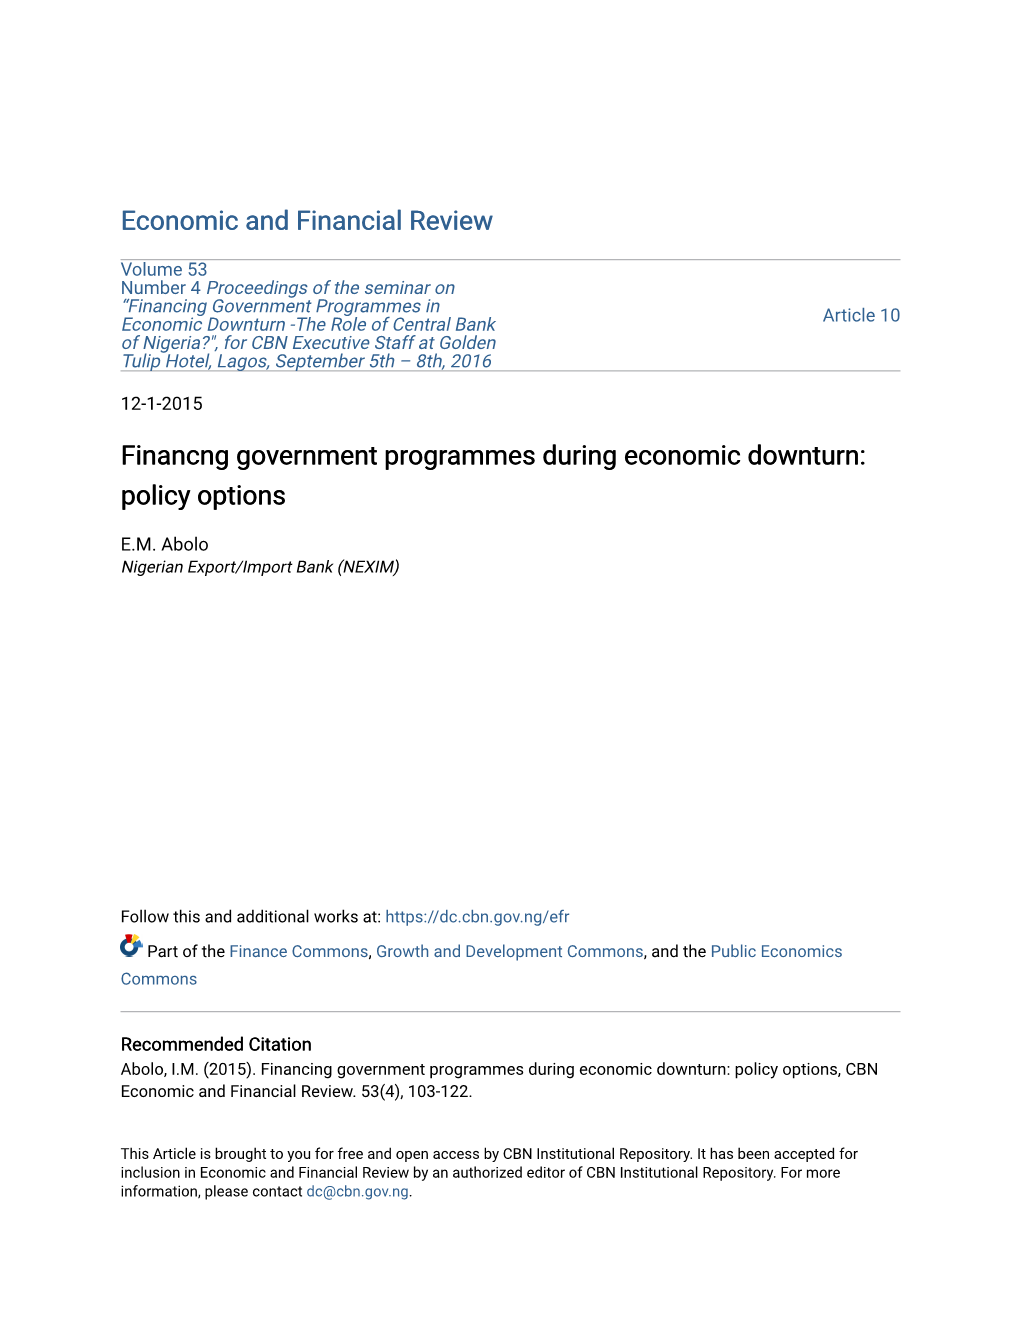 Financng Government Programmes During Economic Downturn: Policy Options